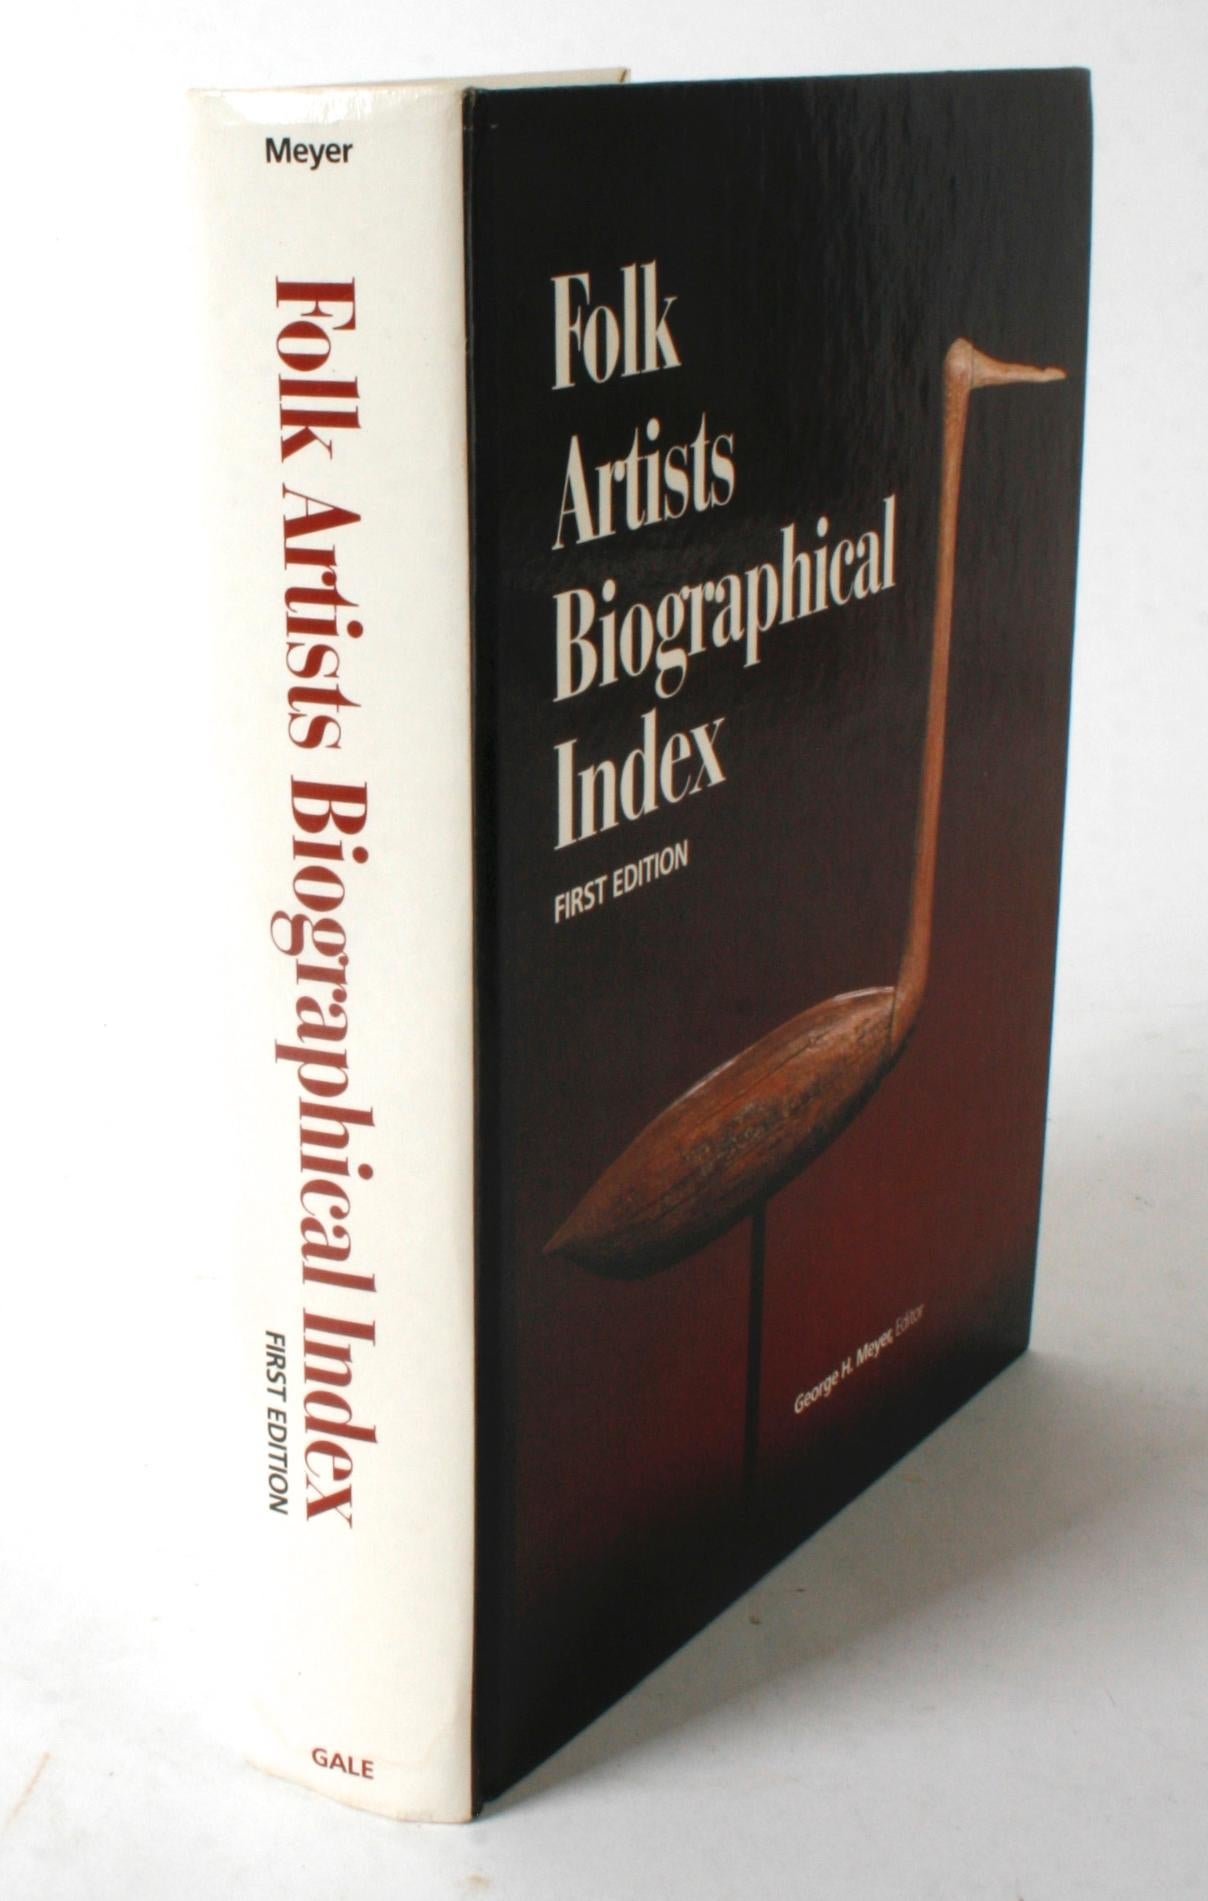 Folk Artists Biographical Index. Detroit: Book Tower, 1987. First edition hardcover. 496 pp. Guide to over 200 published sources of information on approximately 9,000 American folk artists from the 17th century to the present, including brief